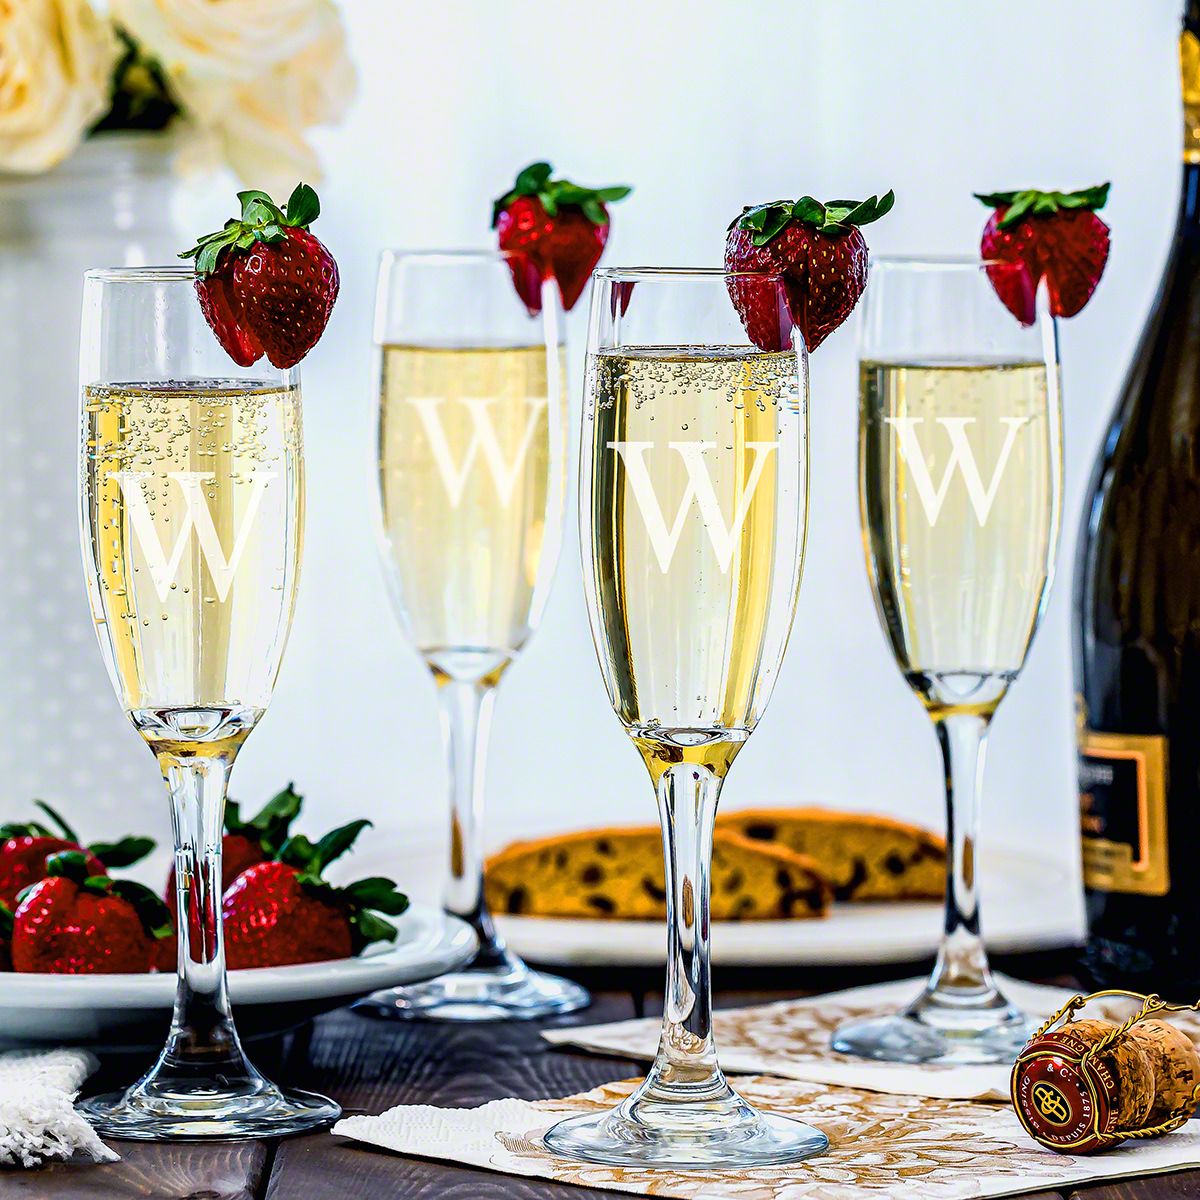 https://images.homewetbar.com/media/catalog/product/r/o/rousseau-etched-champagne-glasses-set-of-4-primary_6562.jpg?store=default&image-type=image